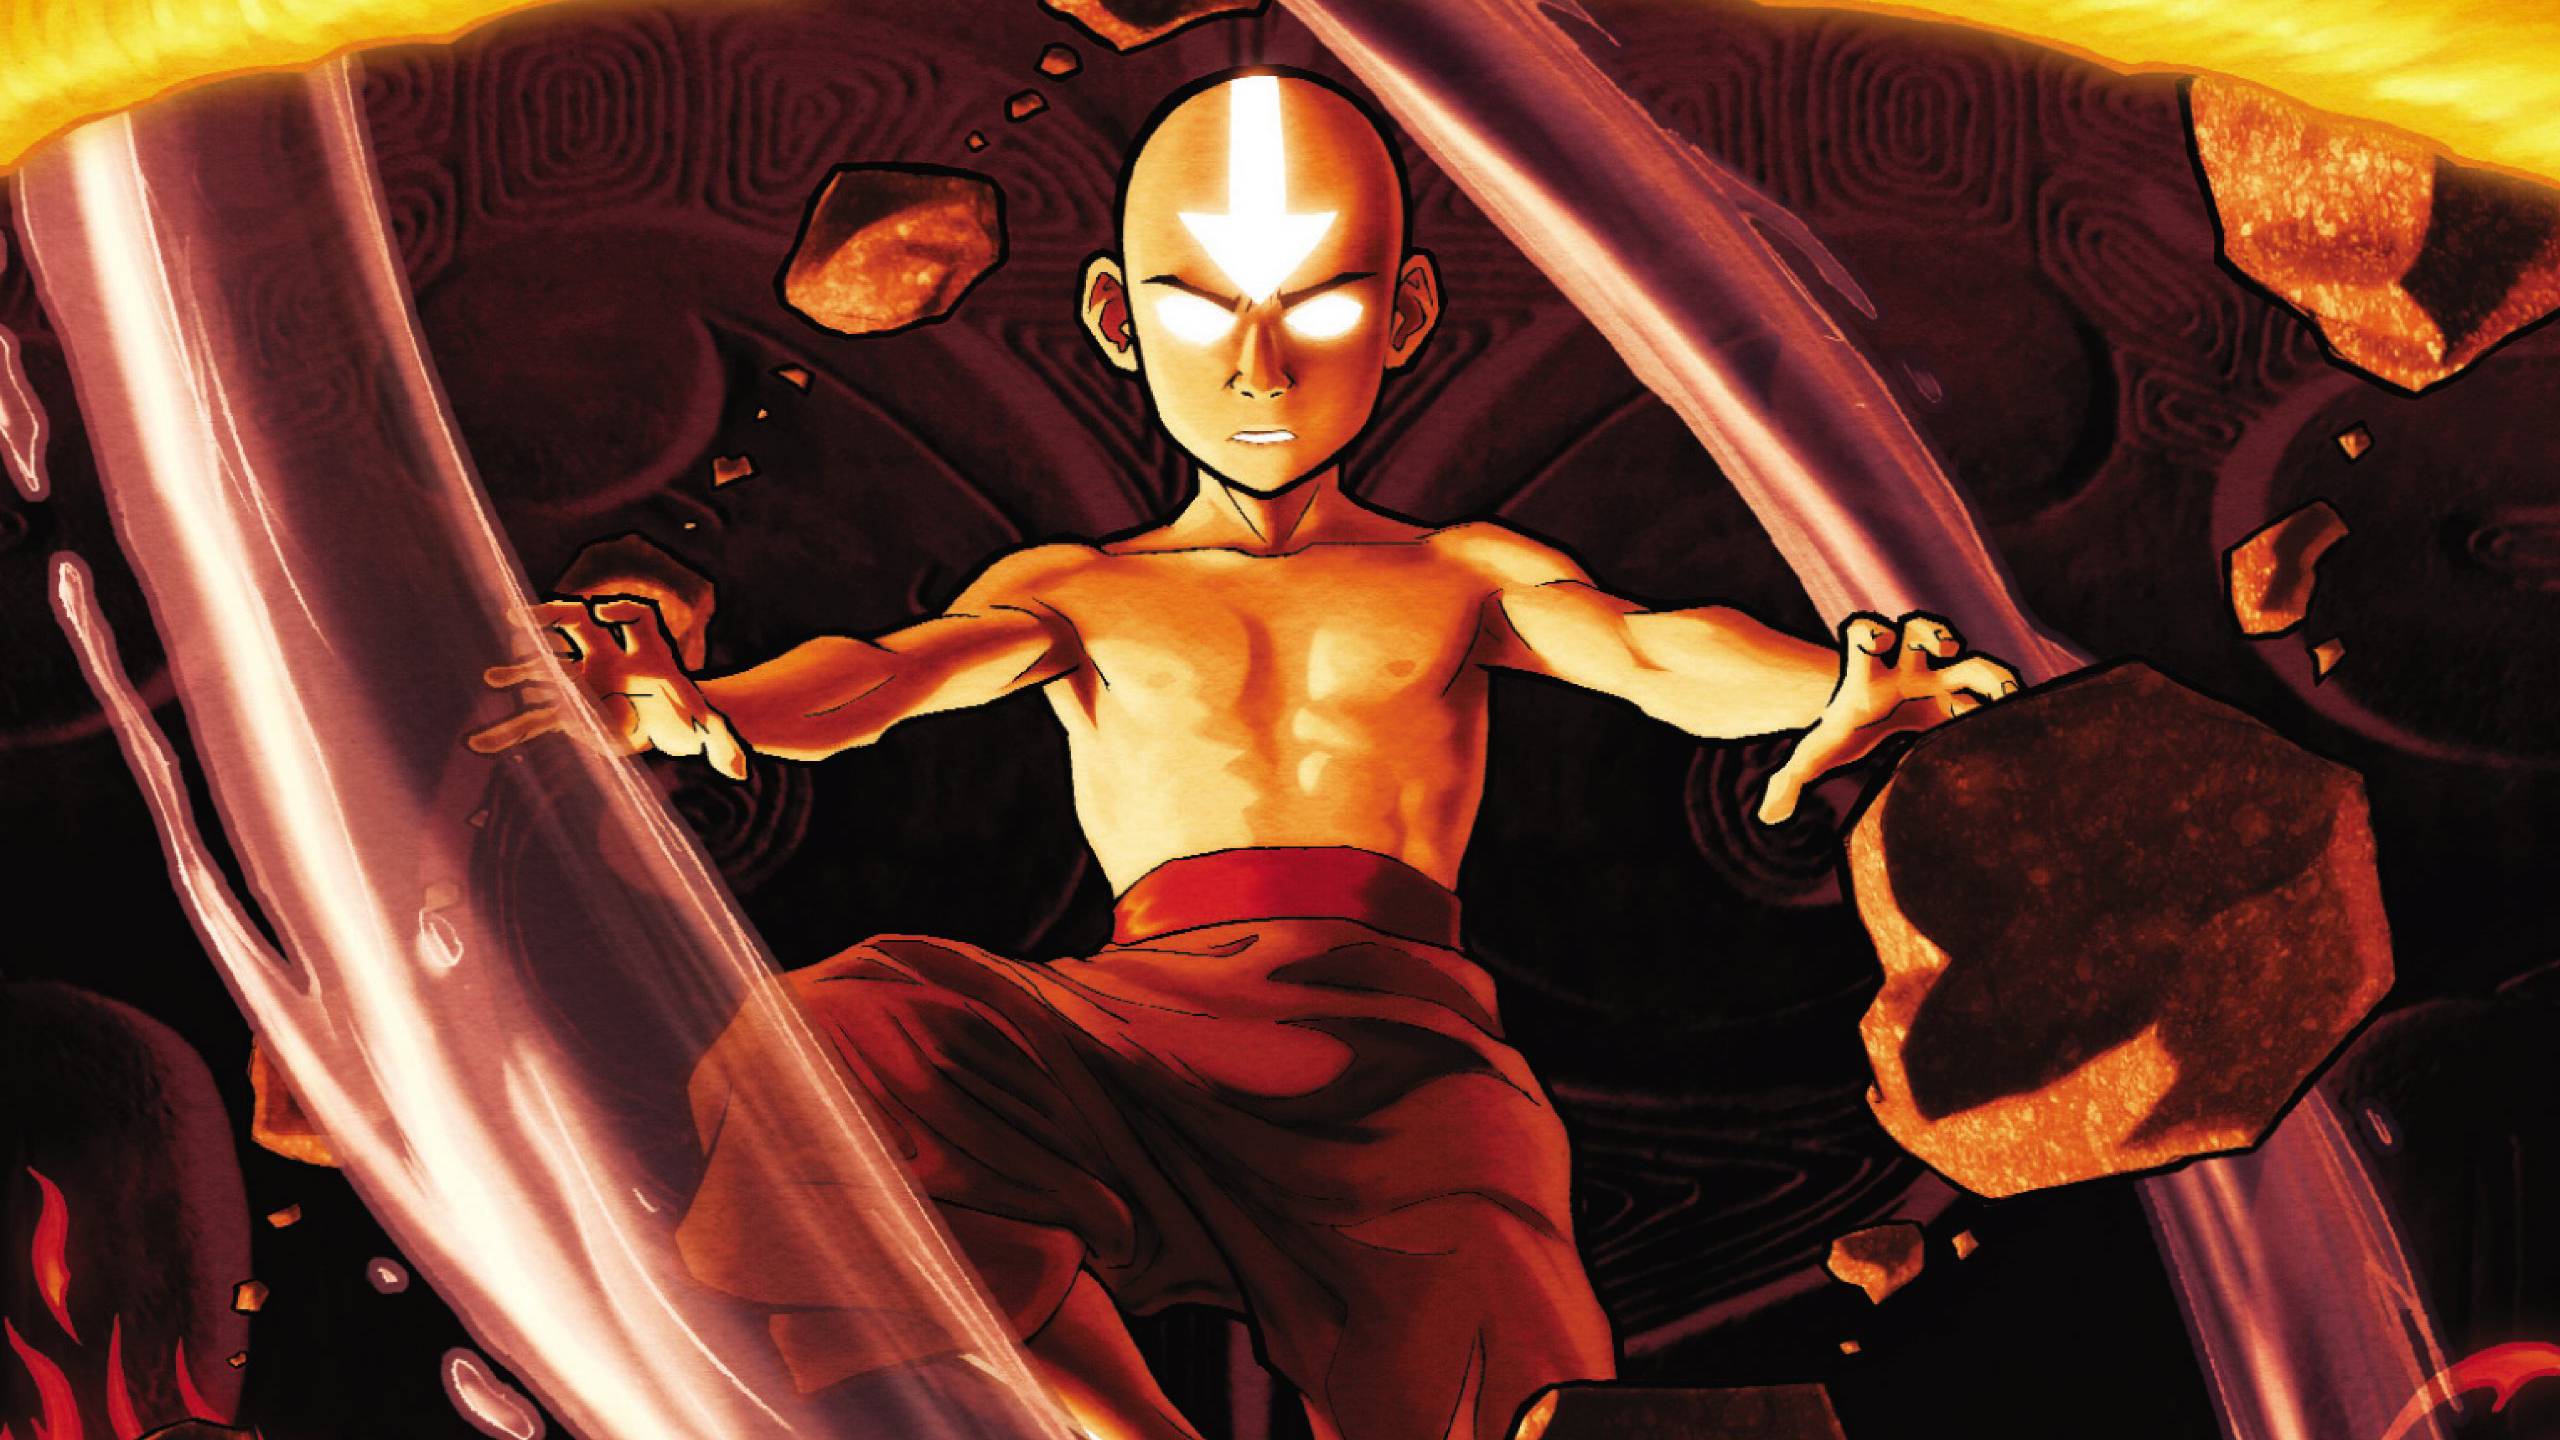 image For > Avatar The Last Airbender Wallpaper Characters